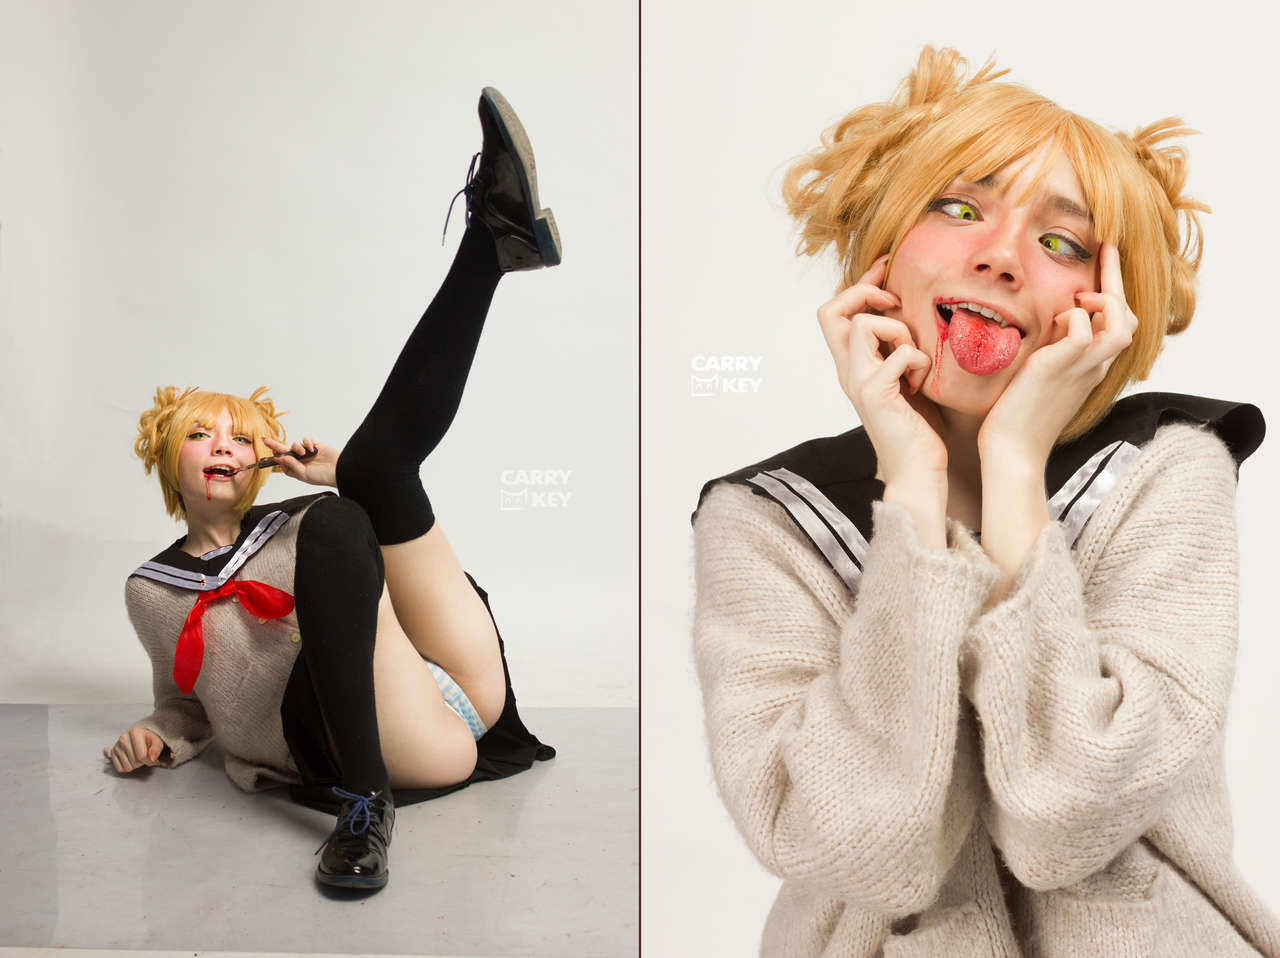 Toga Himiko By Carrykey 